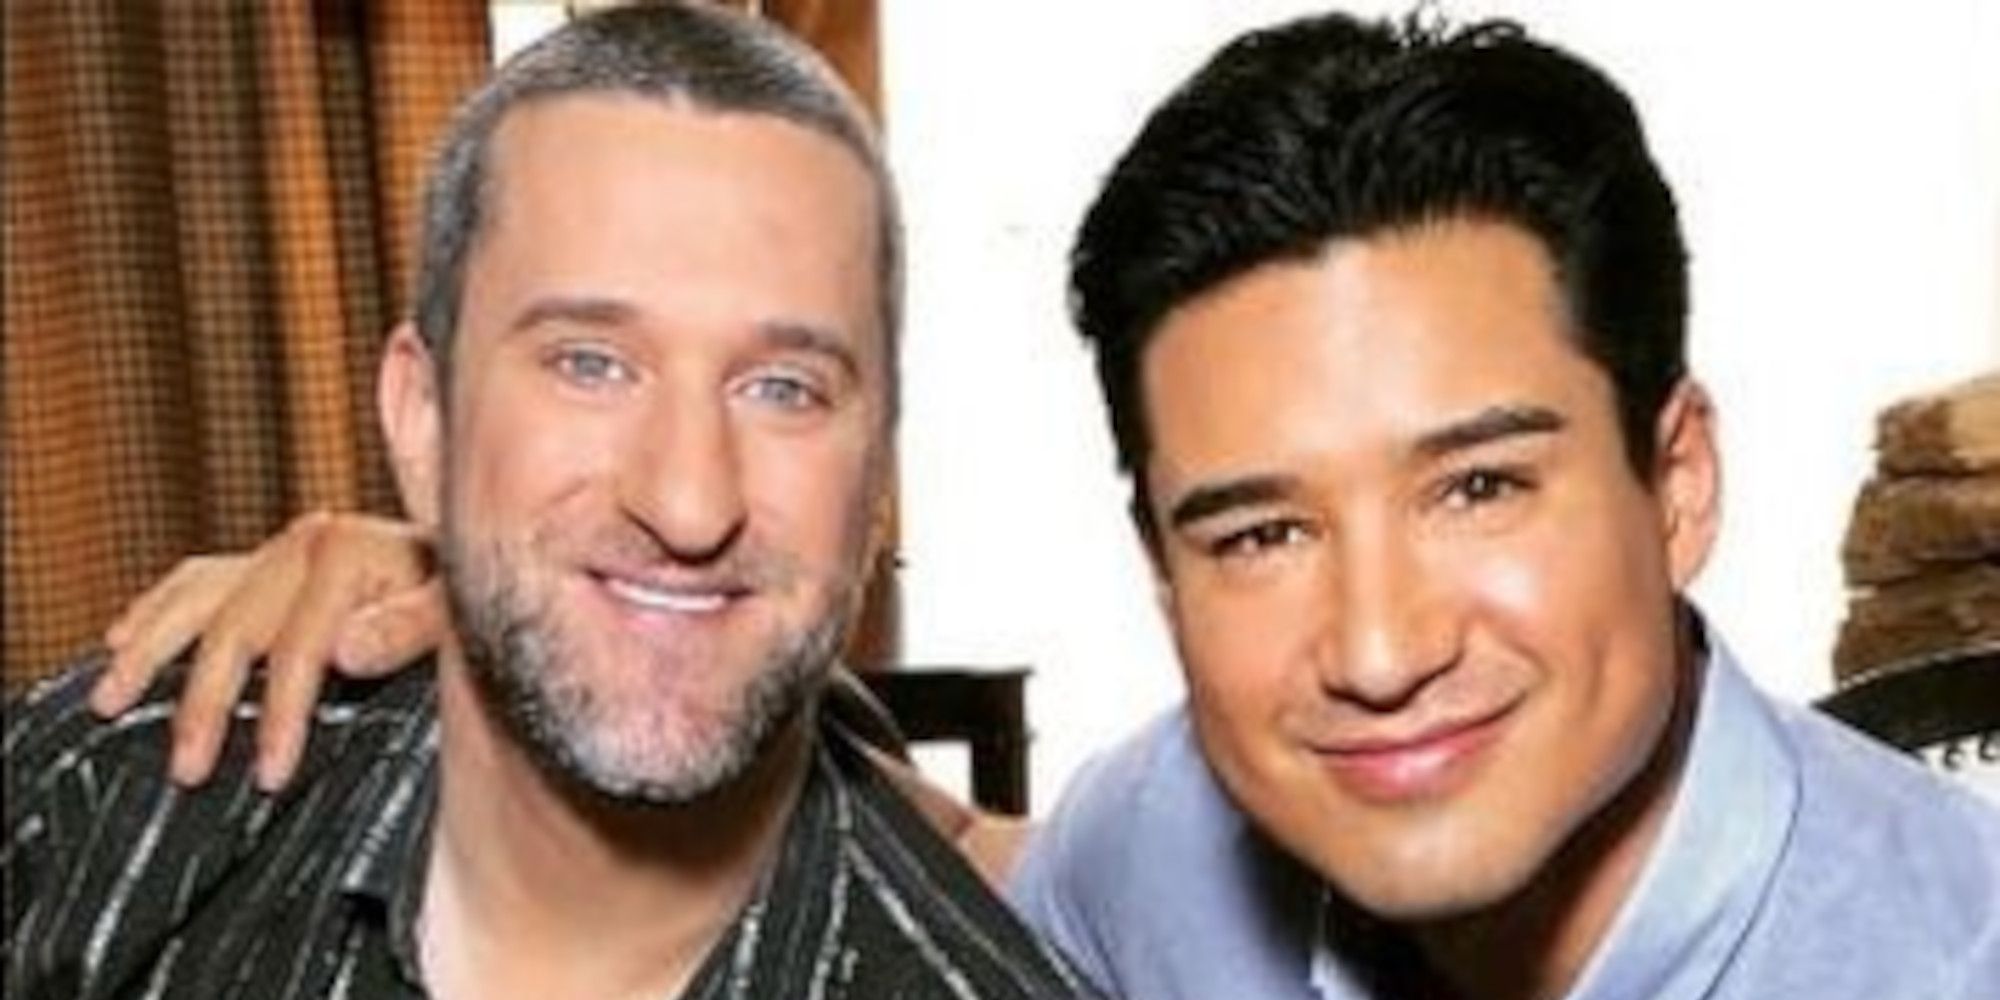 Saved by the Bell - Dustin Diamond and Mario Lopez header